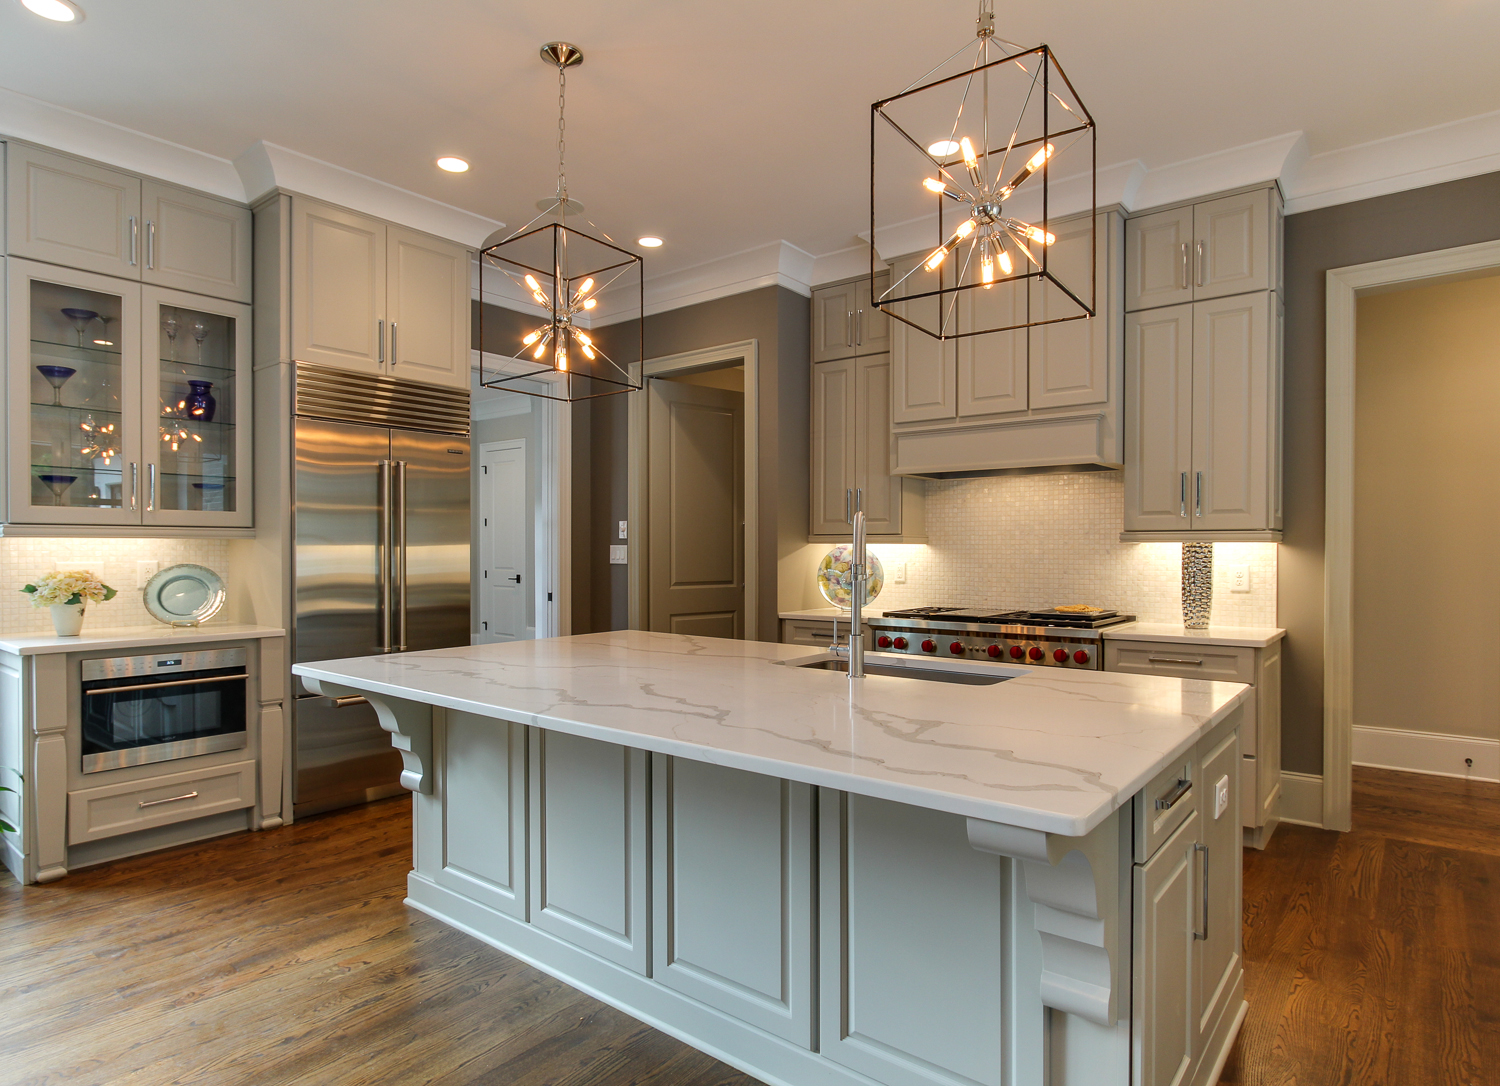 Transitional kitchen cabinets, Traditional cabinets, Shaker cabinets